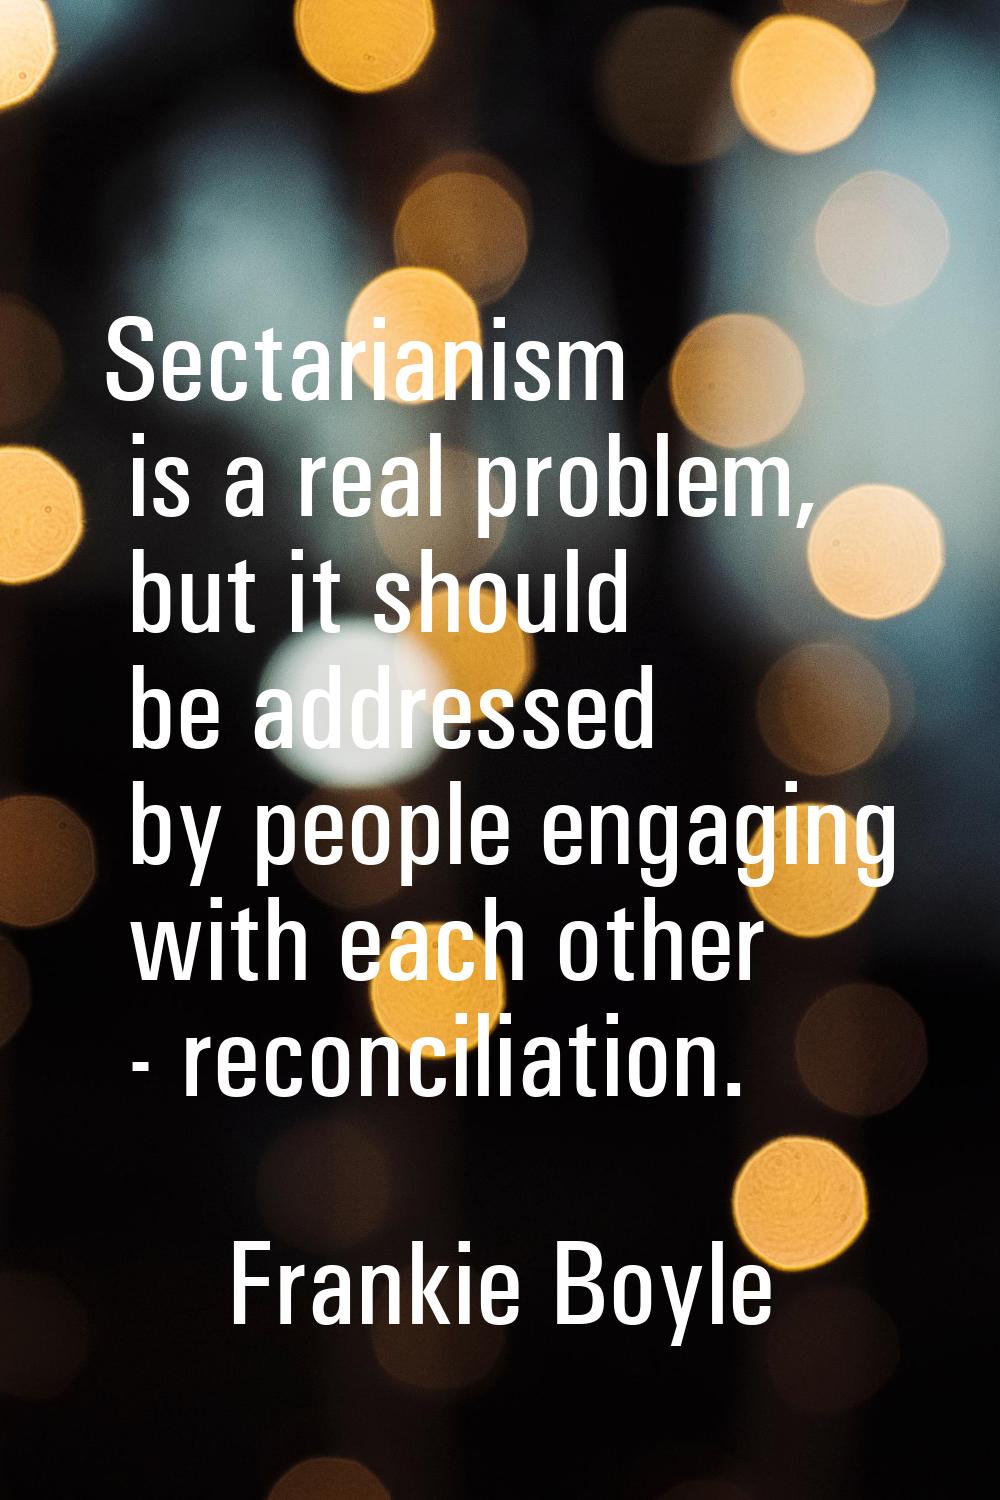 Sectarianism is a real problem, but it should be addressed by people engaging with each other - rec